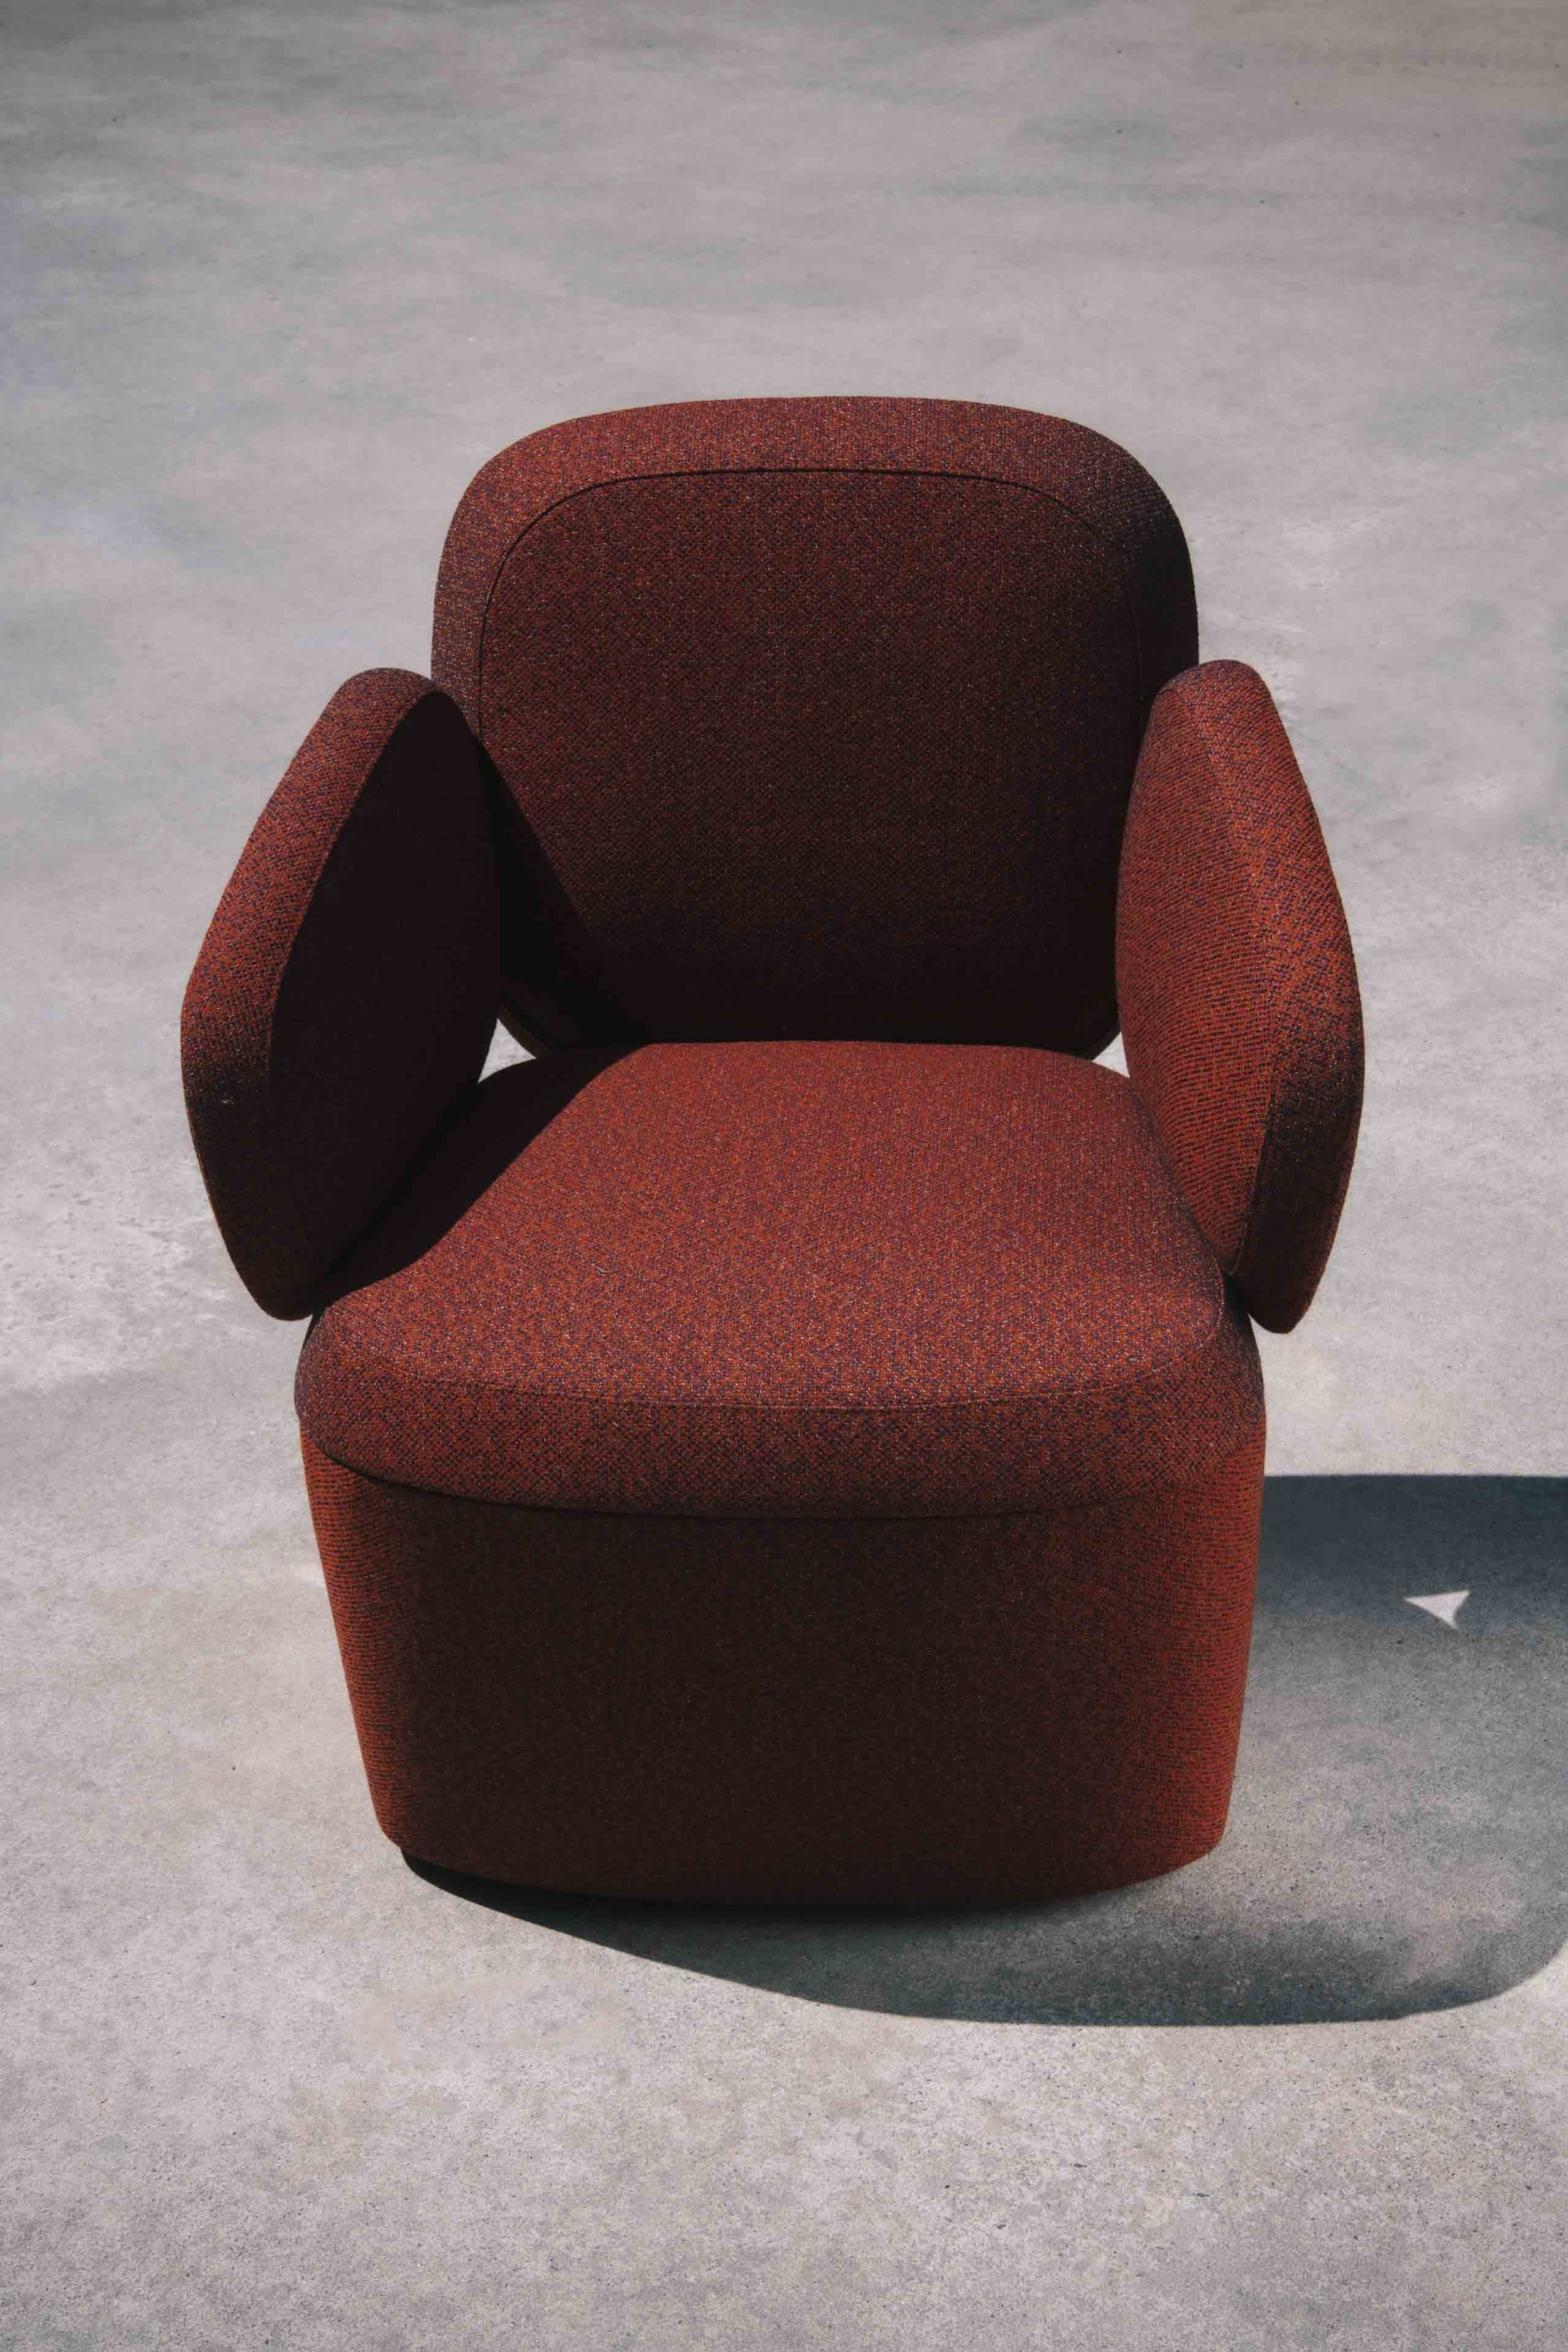 Sassi by Atelier oï
Dimensions: W 64.5 x D 61 x H 80 cm
Materials: Wood and foam
Upholstery: fabrics or leathers

The Sassi armchair borrows its Italian name and its shape from pebbles, the eroded shape of which is its main inspiration. The